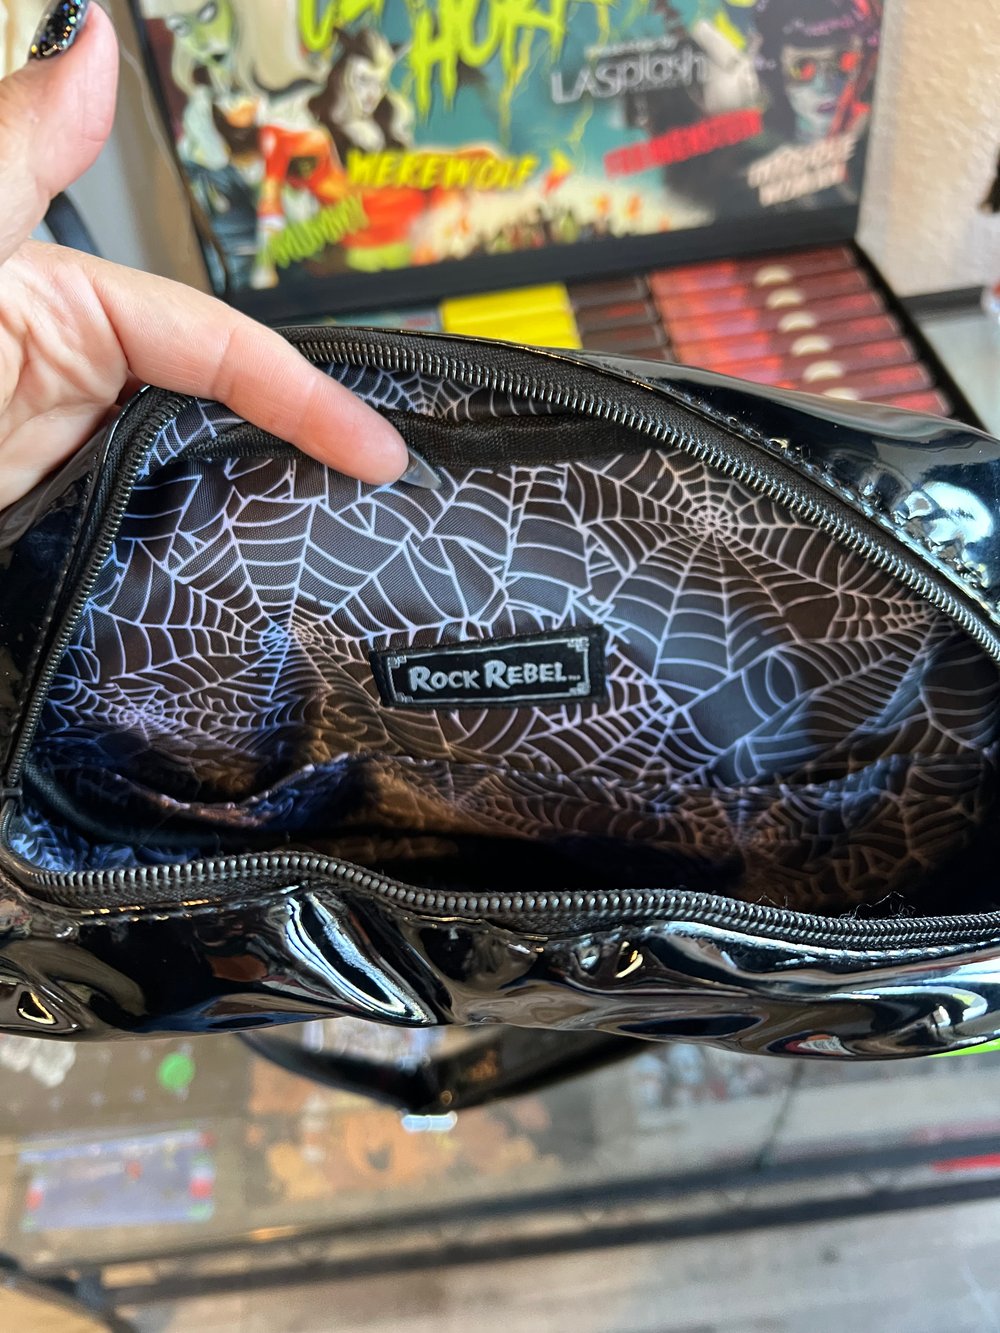 Creature from the black lagoon 🖤 purse 